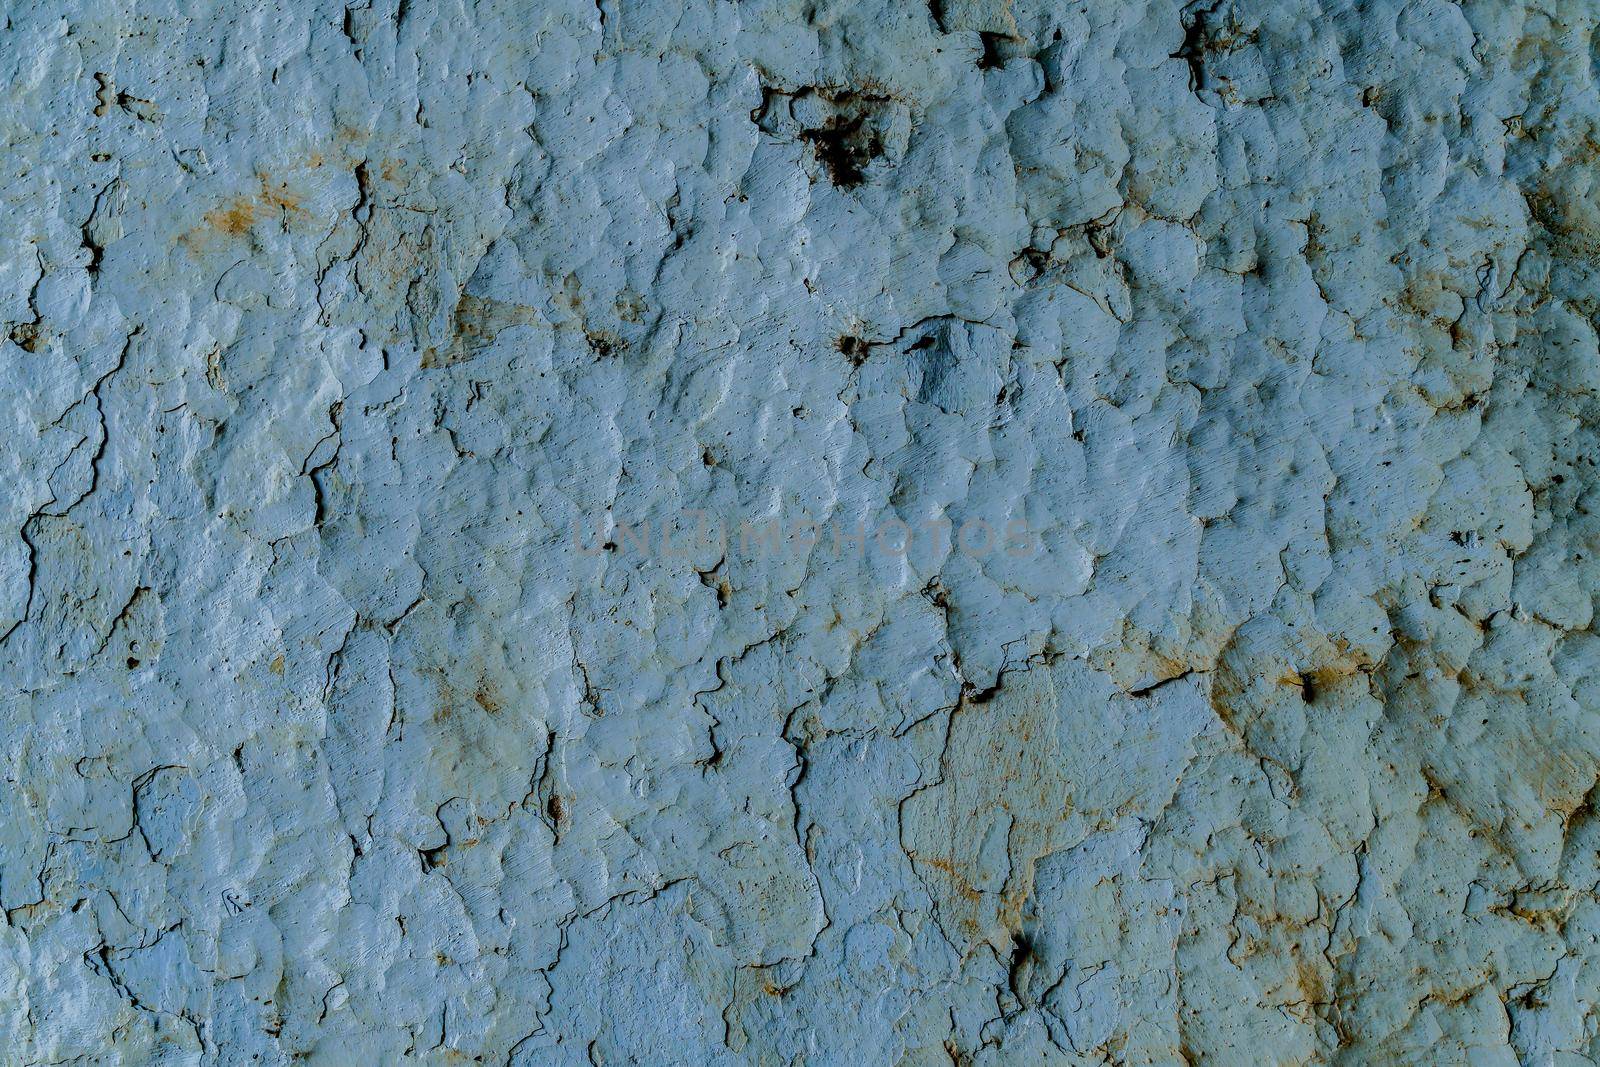 textured background of a wall chipped by the passage of time